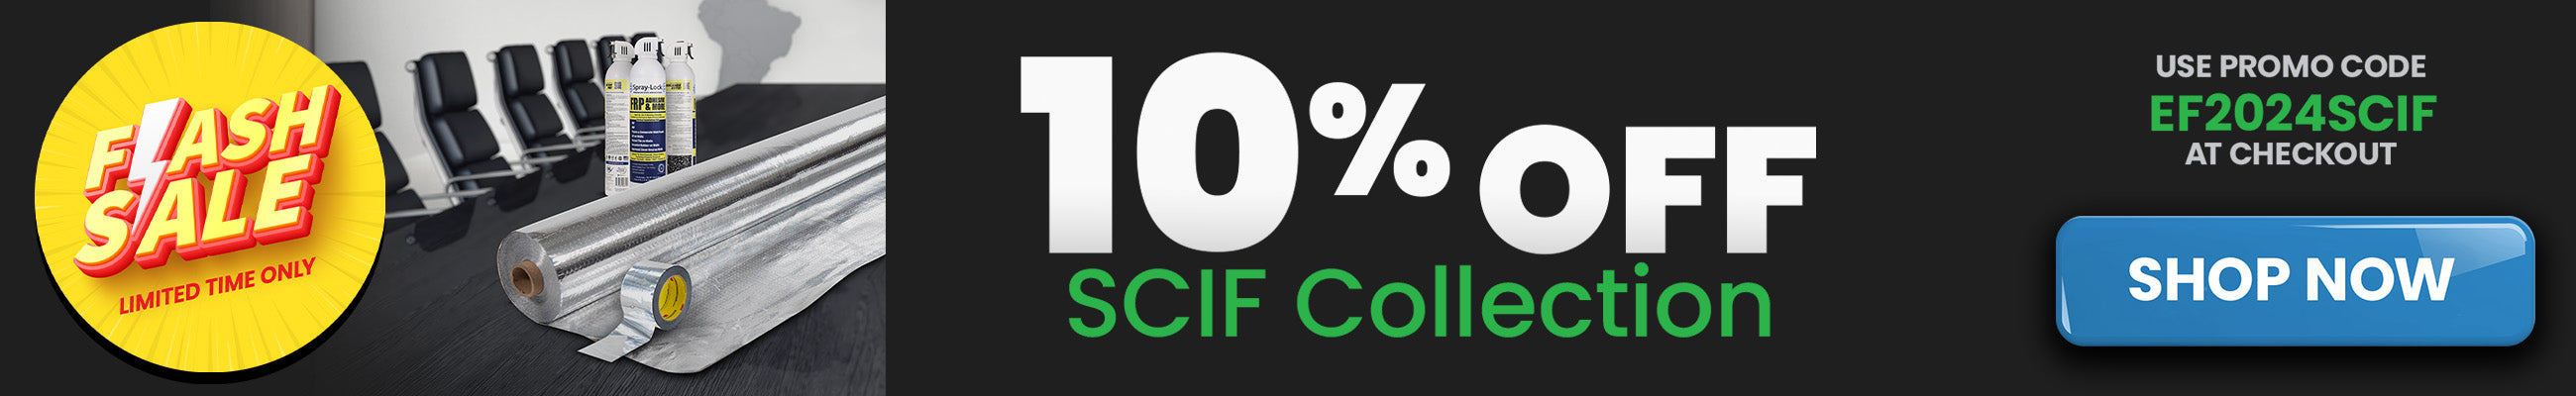 Save 10% on SCIF products. Use coupon code EF2024SCIF